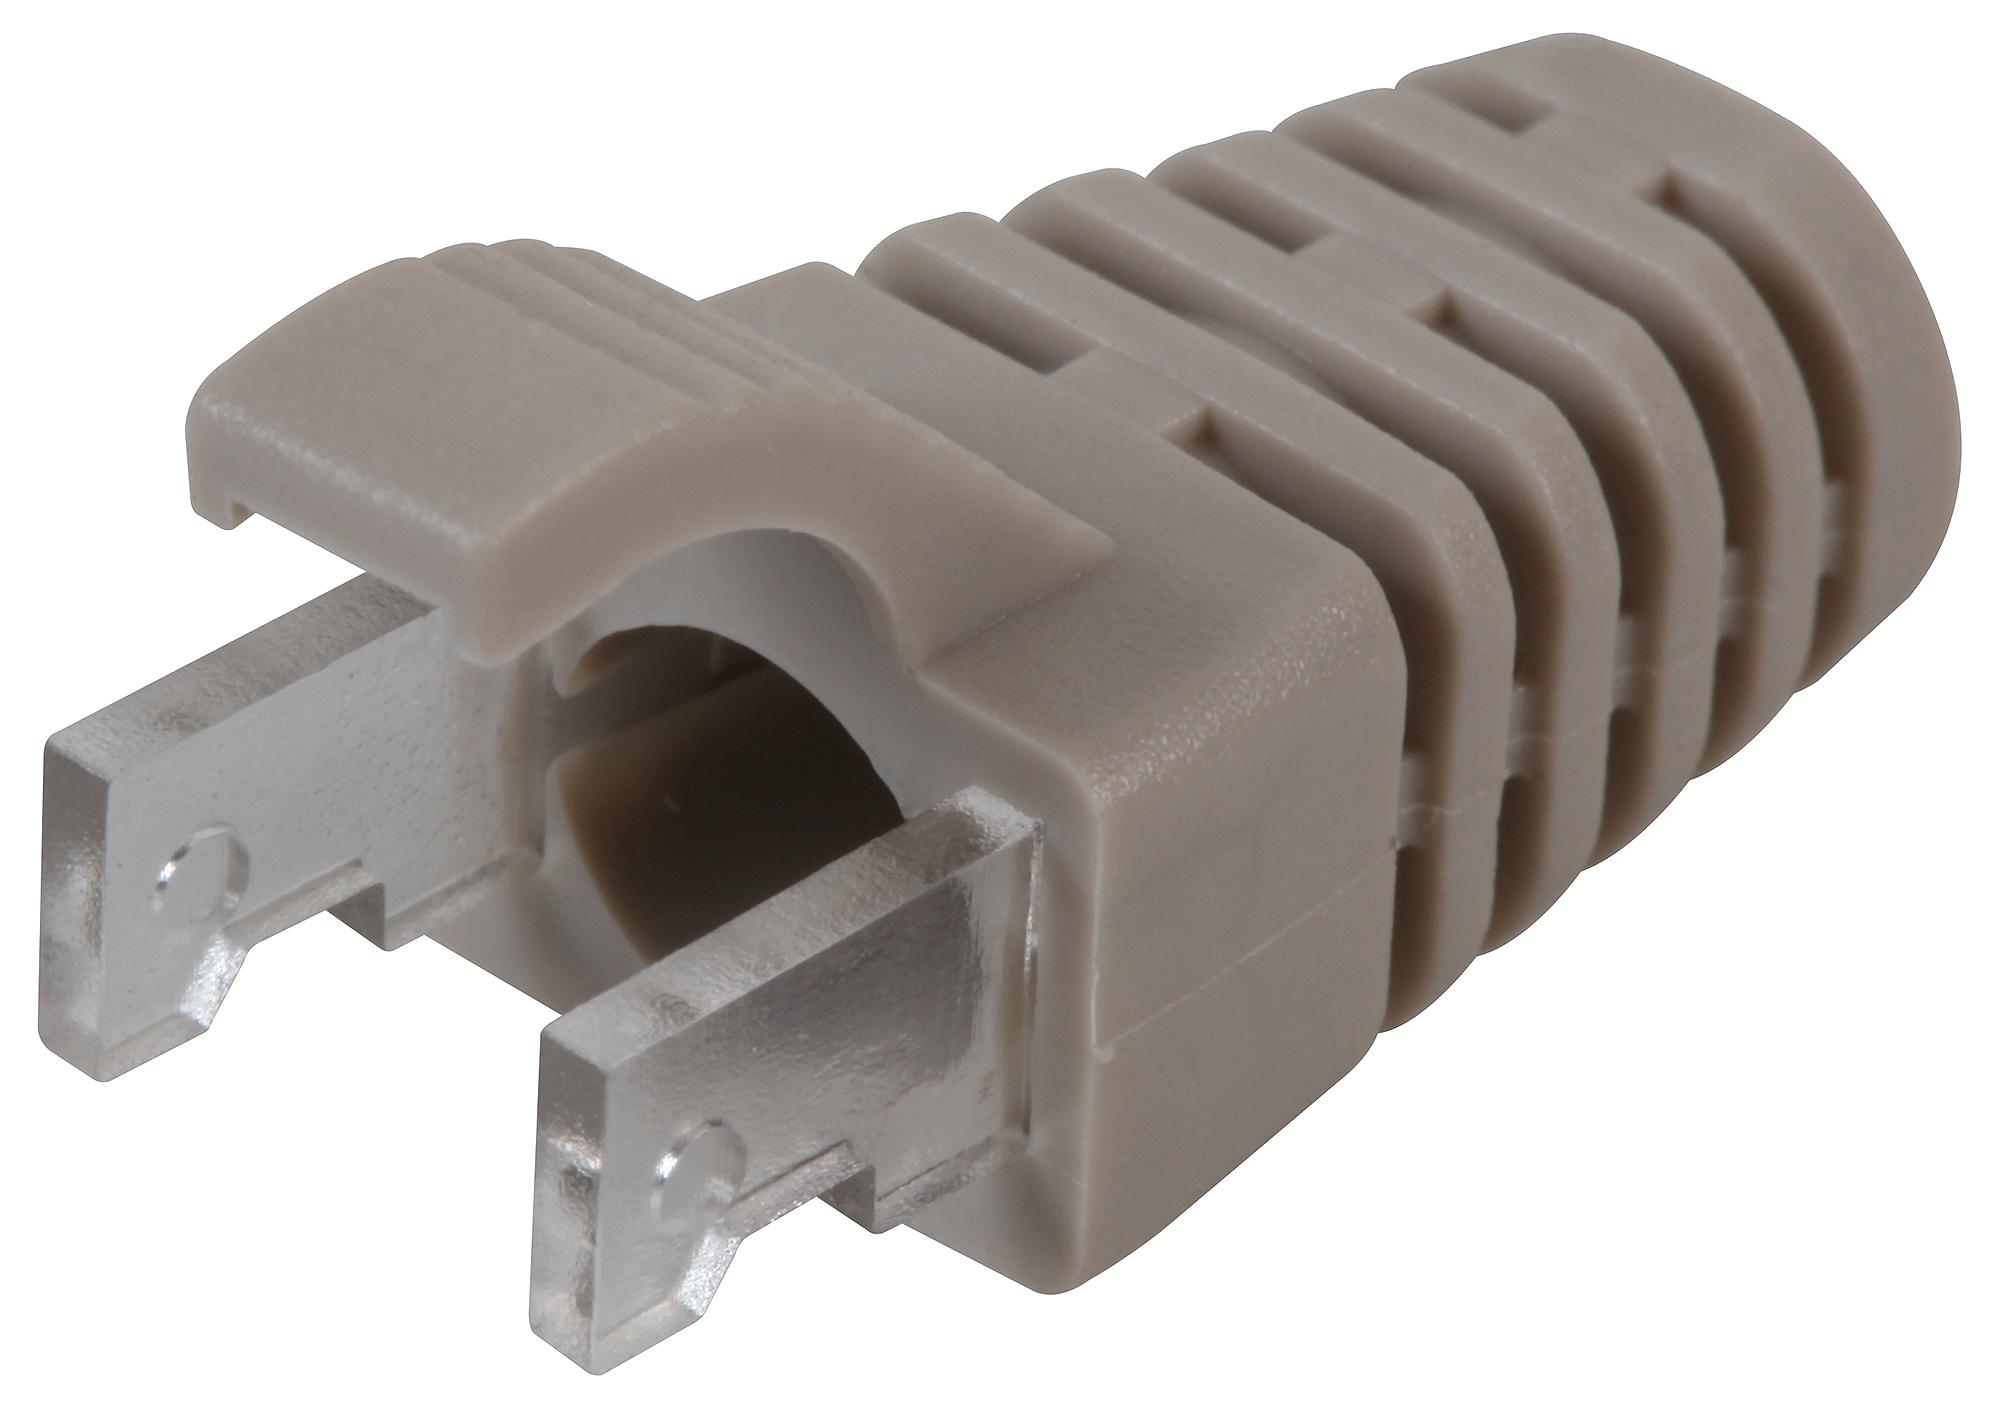 Speedy Rj45 Ps6Gy#100 Strain Relief Boot, Pvc, Rj45 Connector